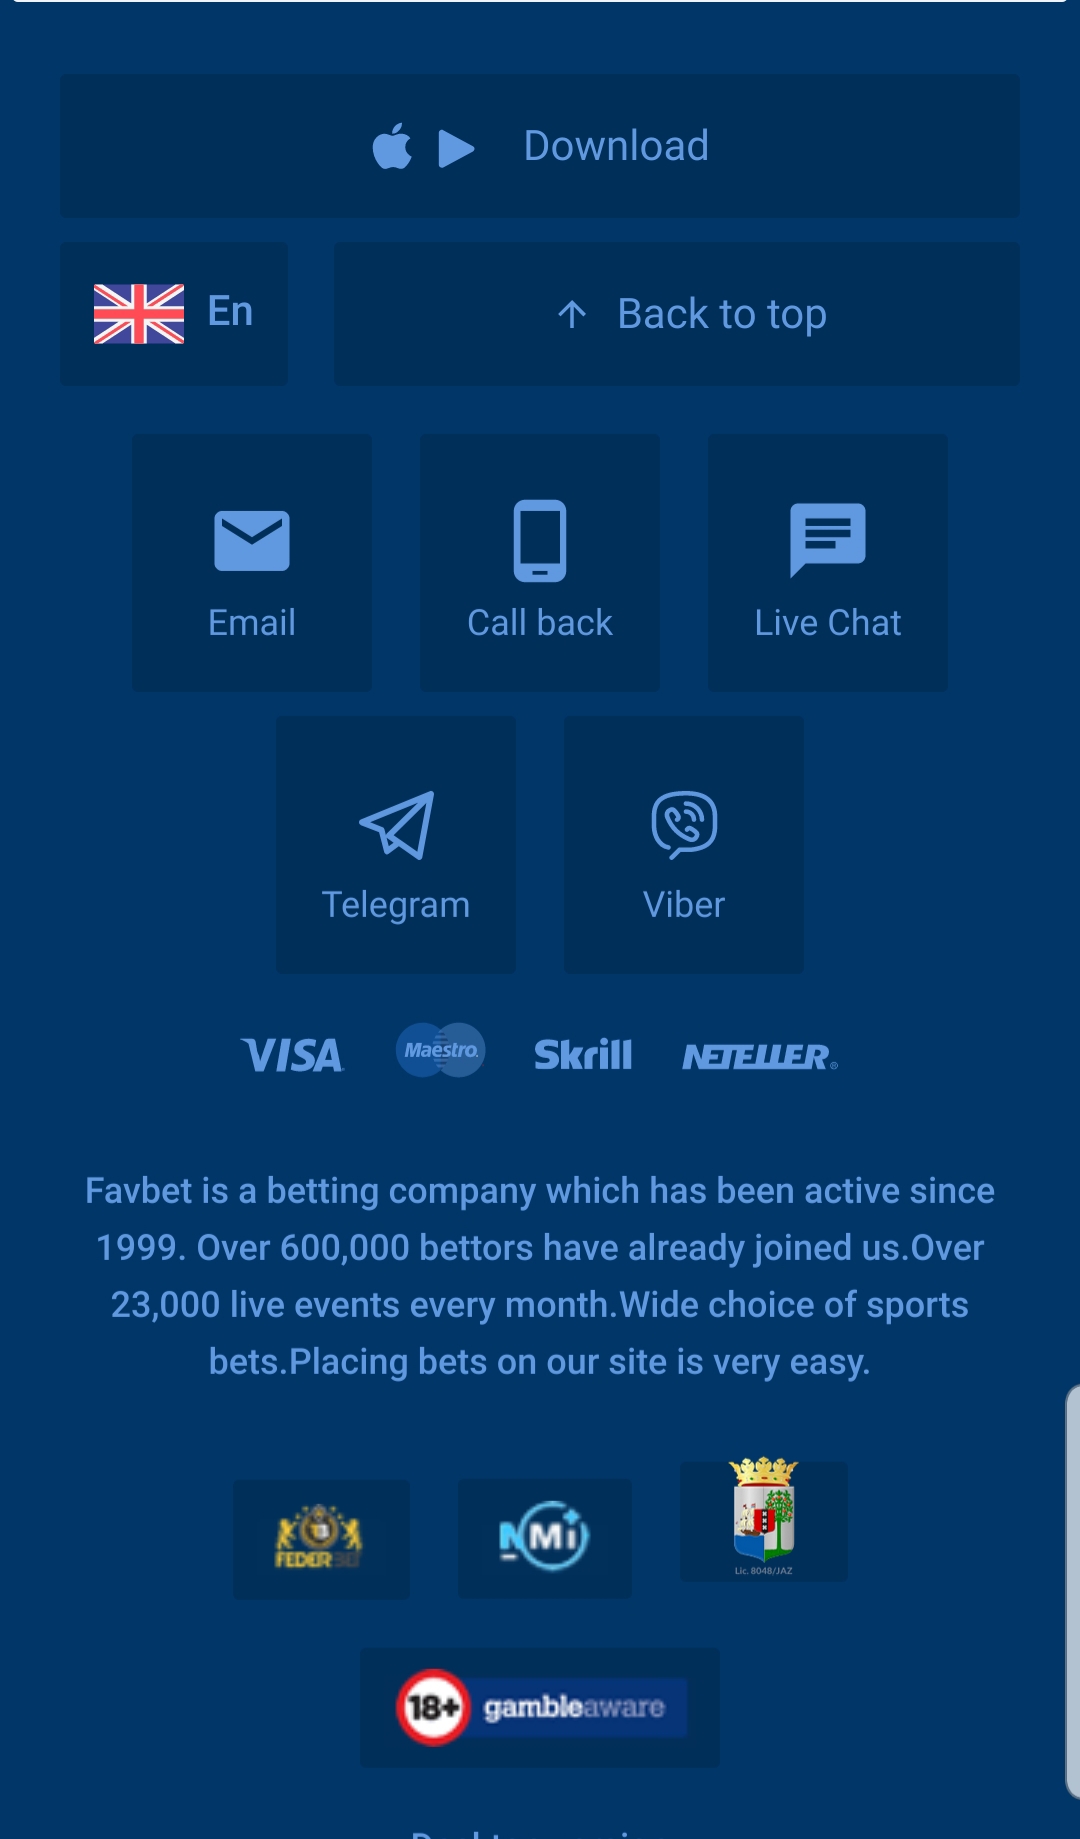 Favbet Casino Mobile Support Review